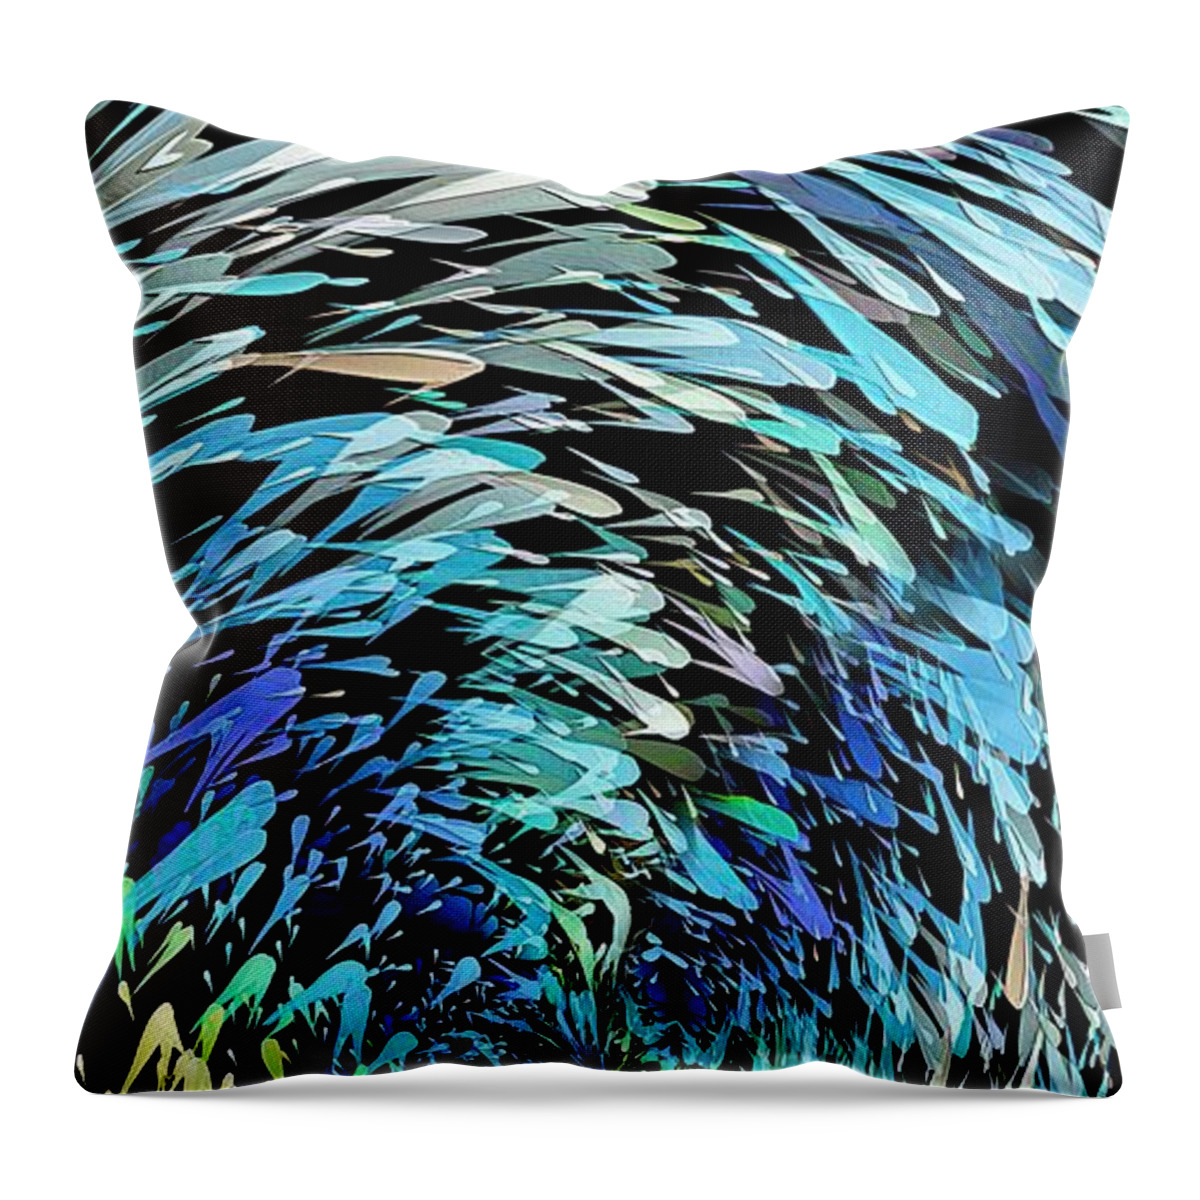 Droplets Throw Pillow featuring the digital art School by David Manlove